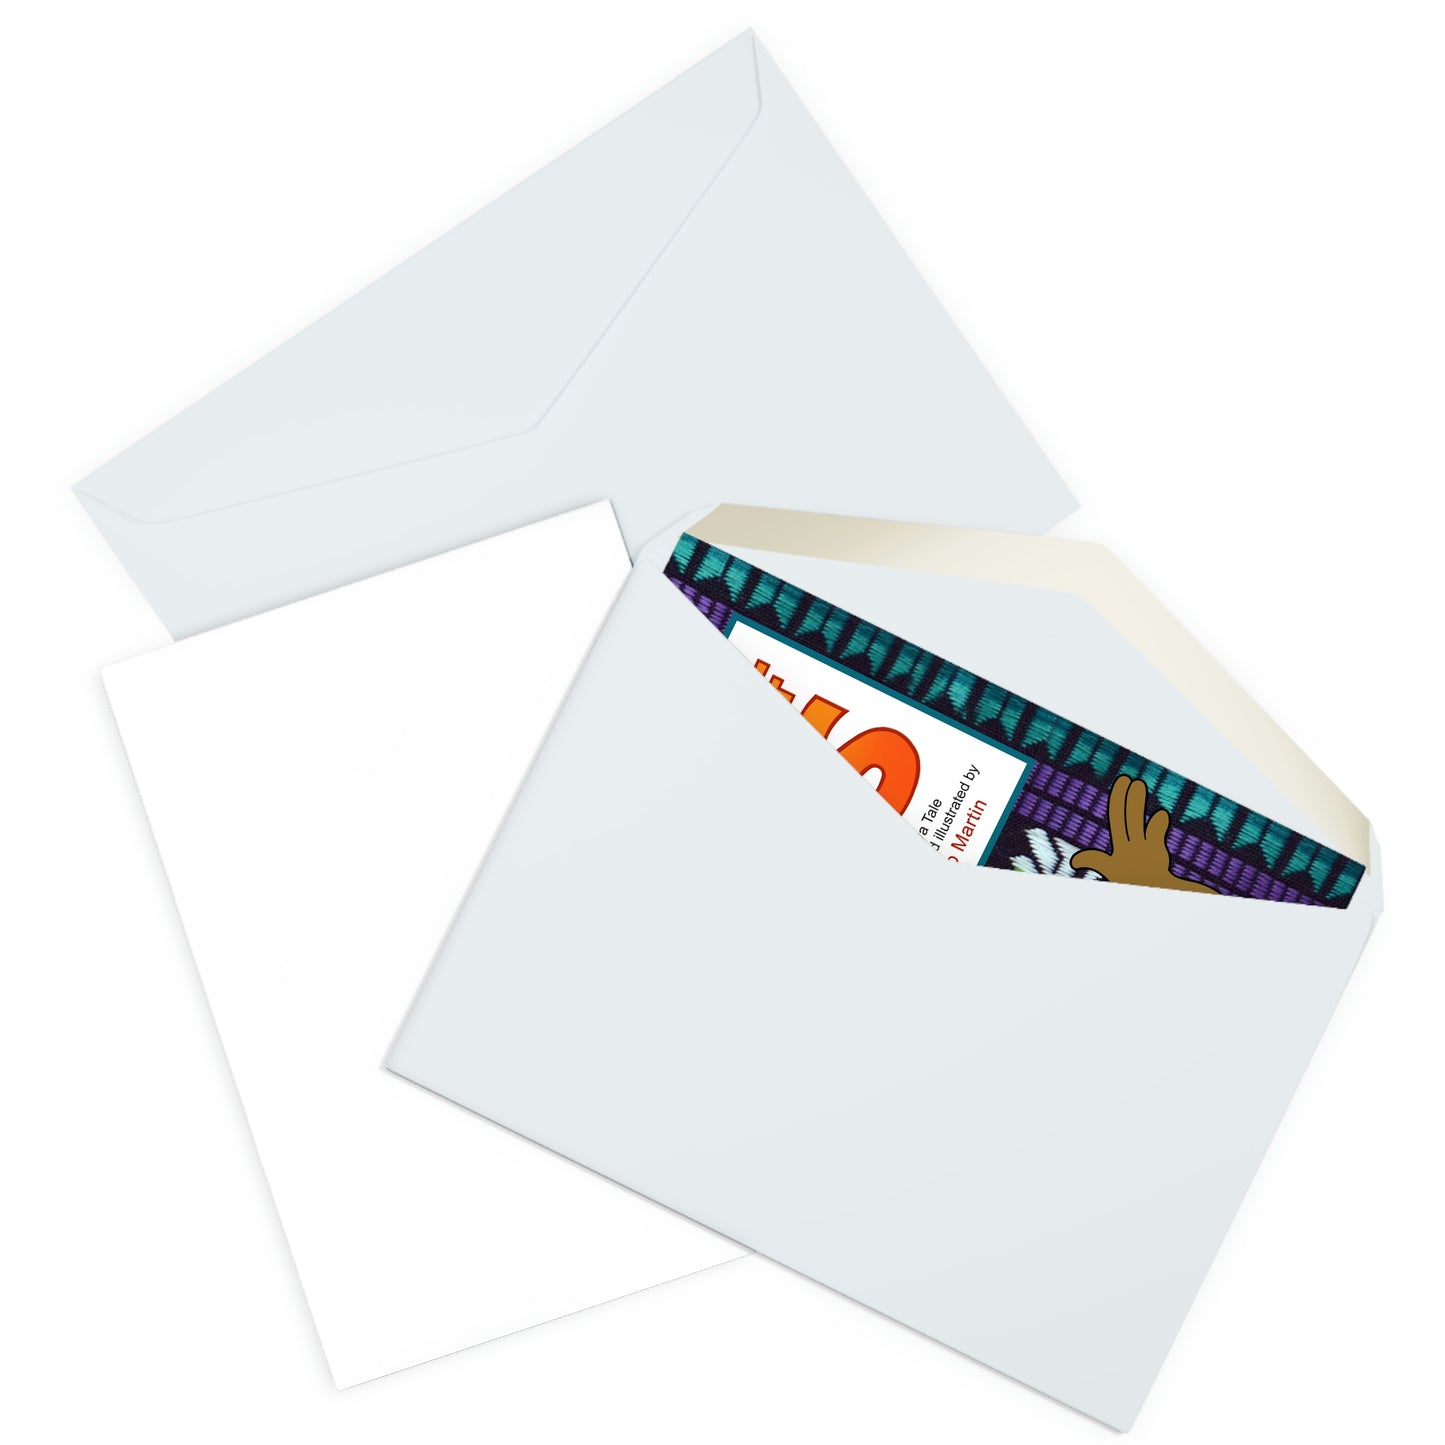 A Pack of Lies Greeting Cards (5 Pack)